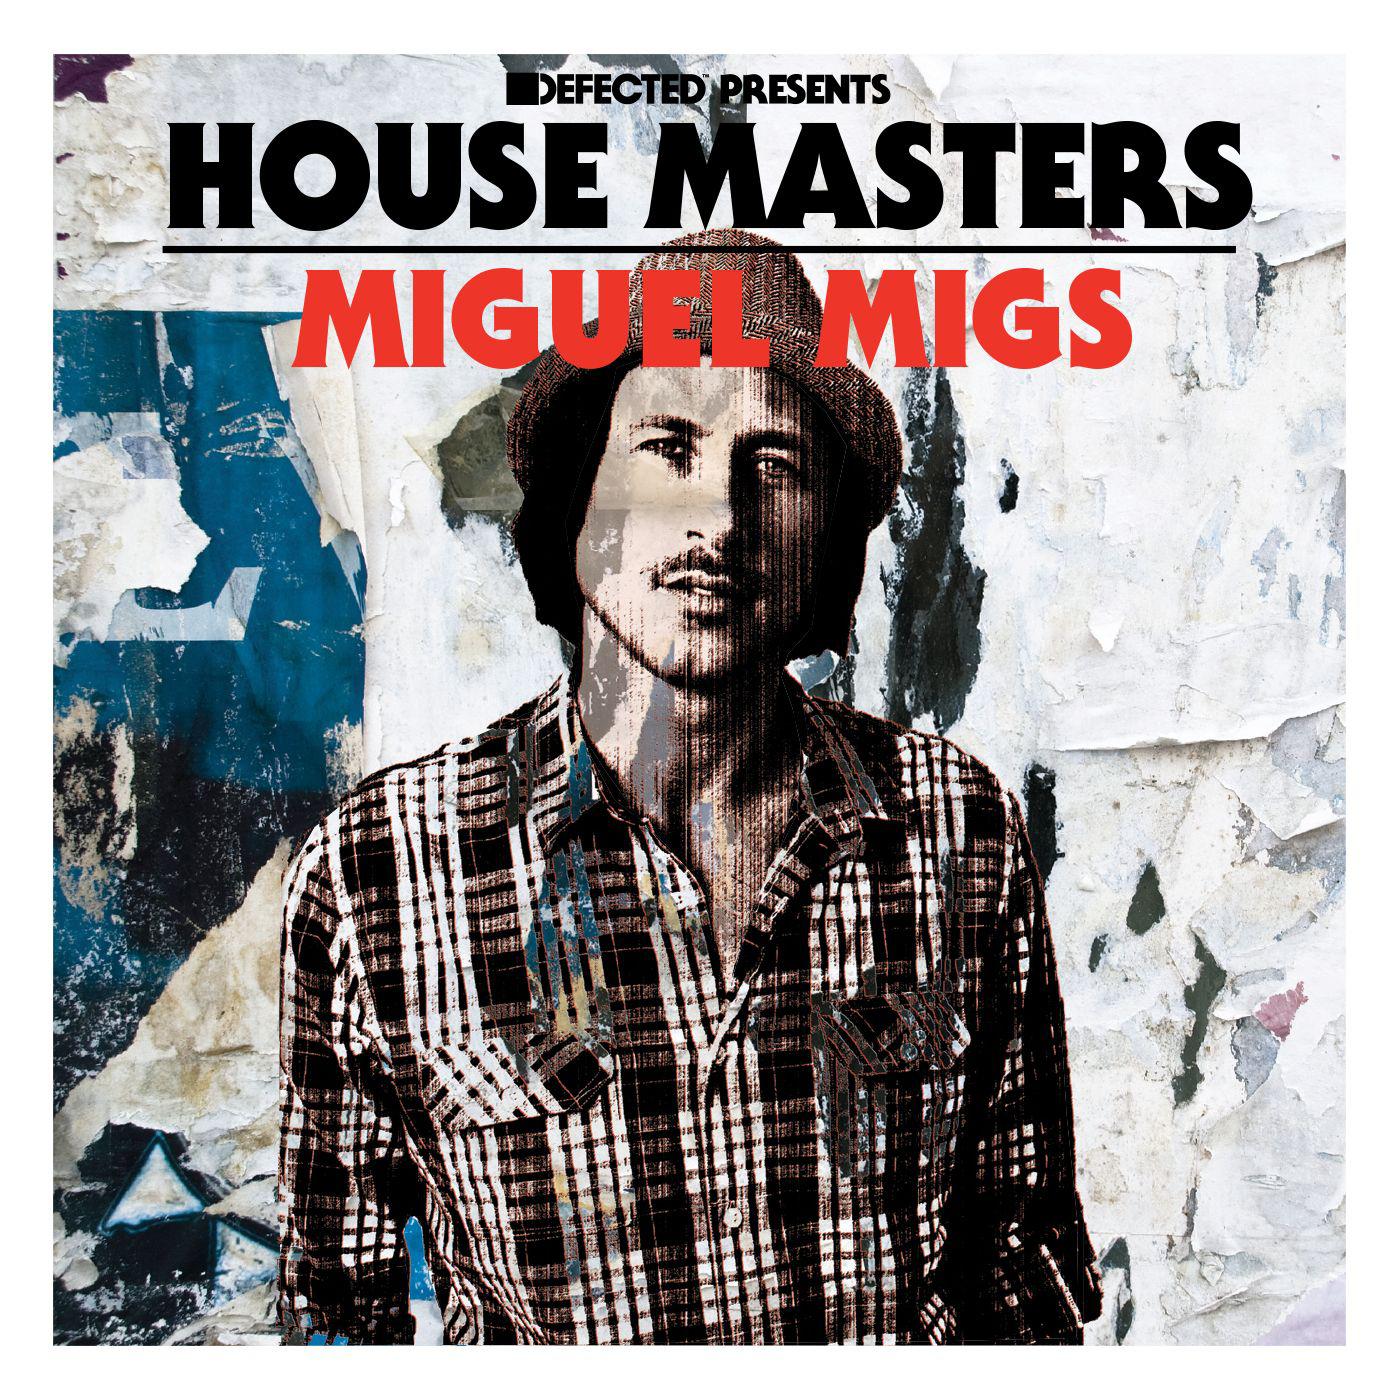 Defected Presents House Masters - Miguel Migs